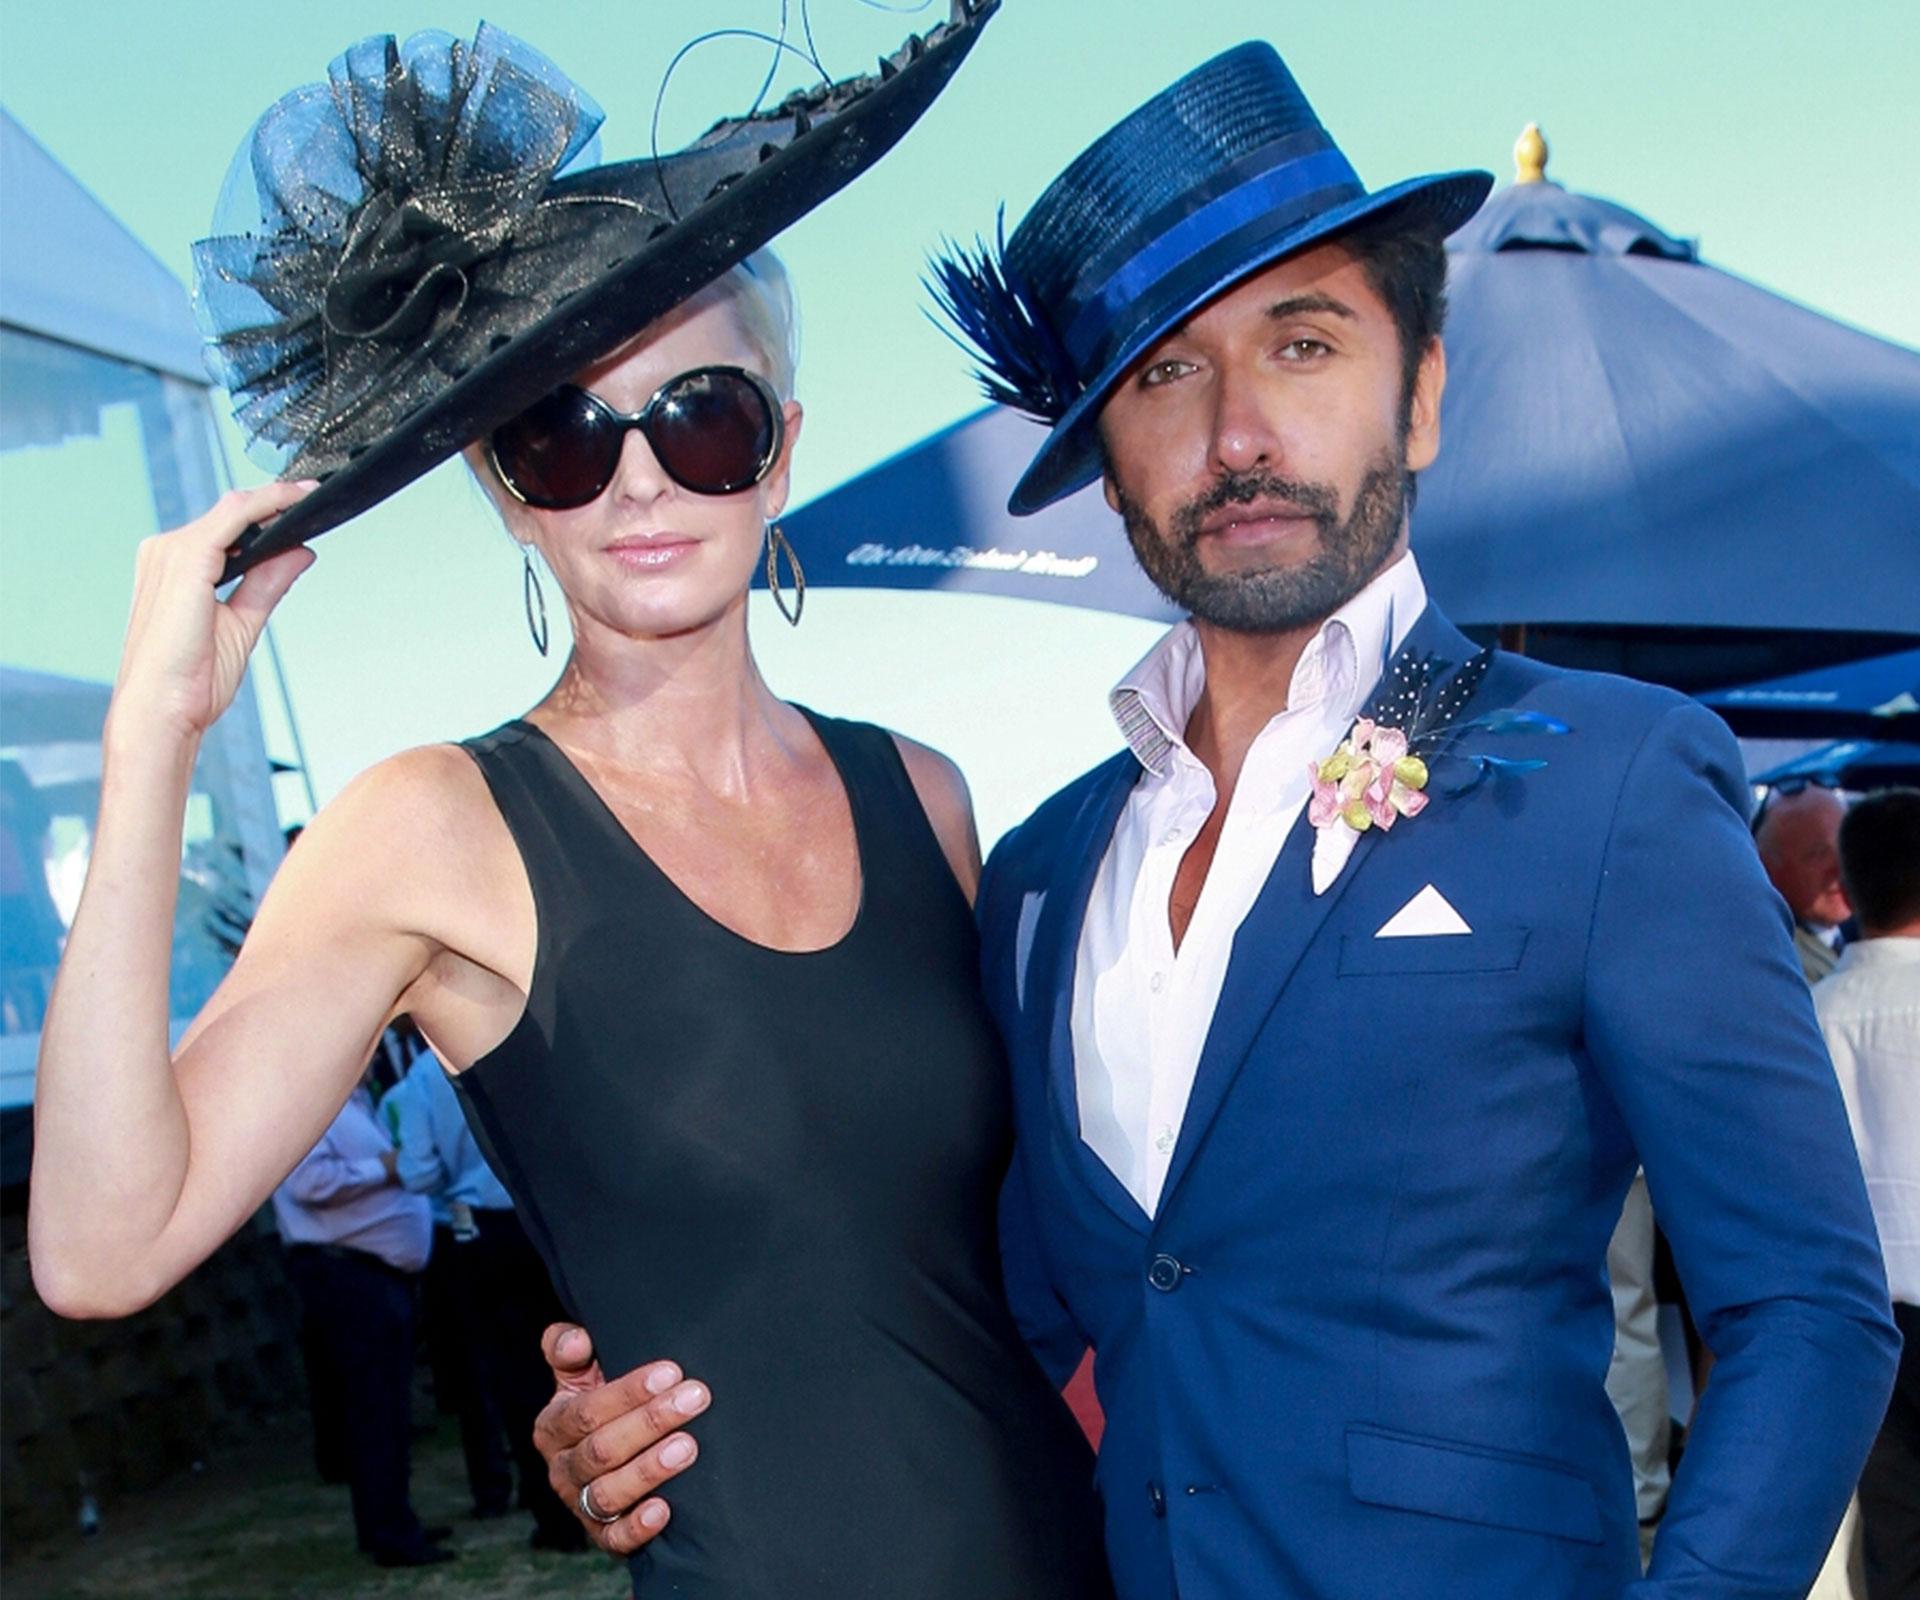 How to ace your race day fashion